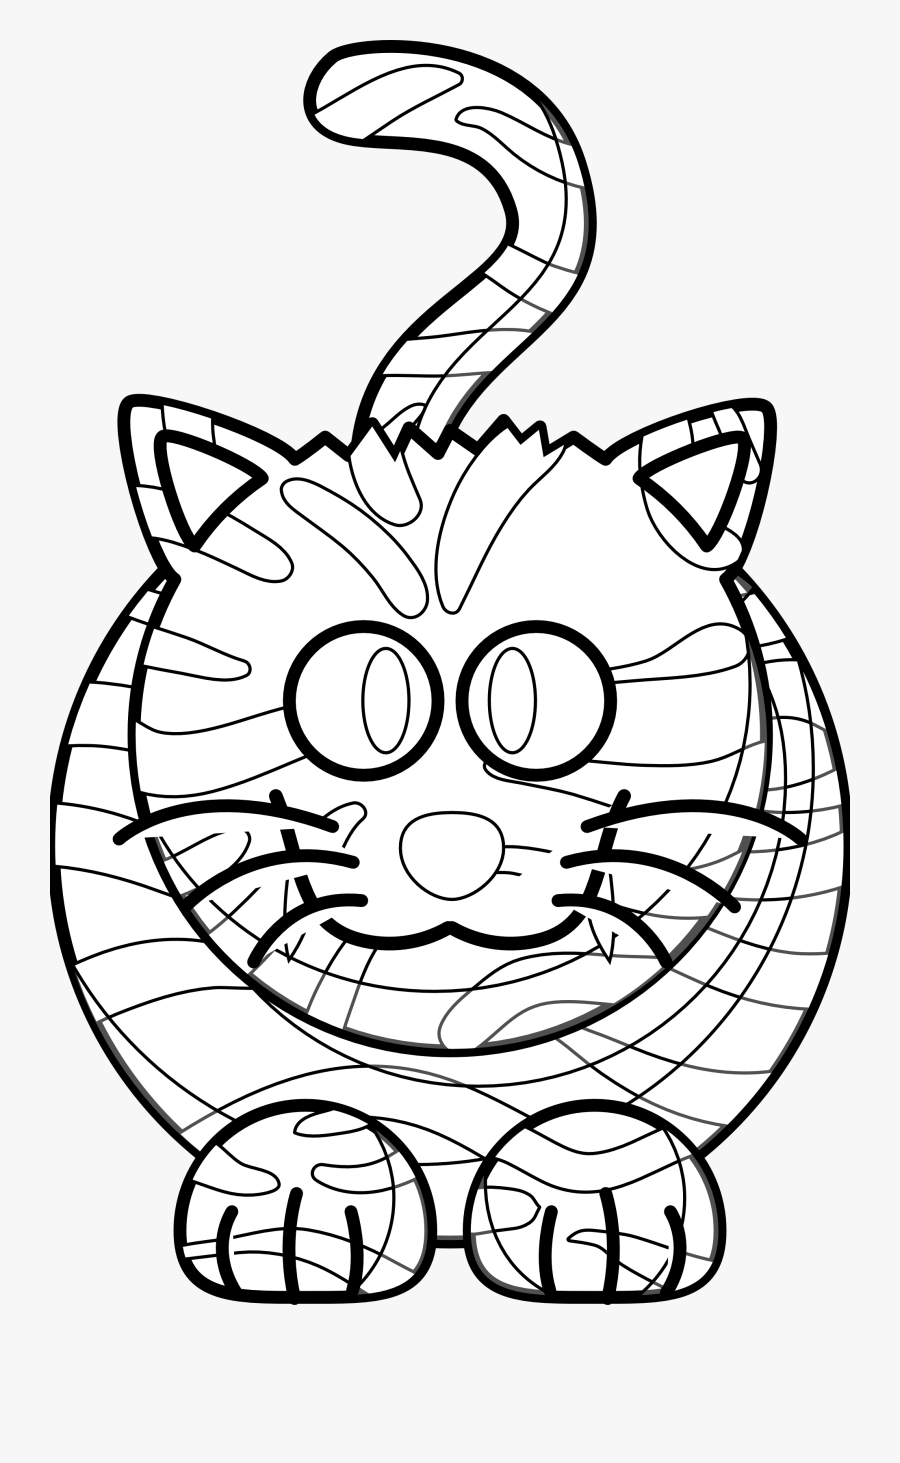 Cartoon Tiger Black White Line Art Coloring Book Colouring - Cat Drawing For Print, Transparent Clipart